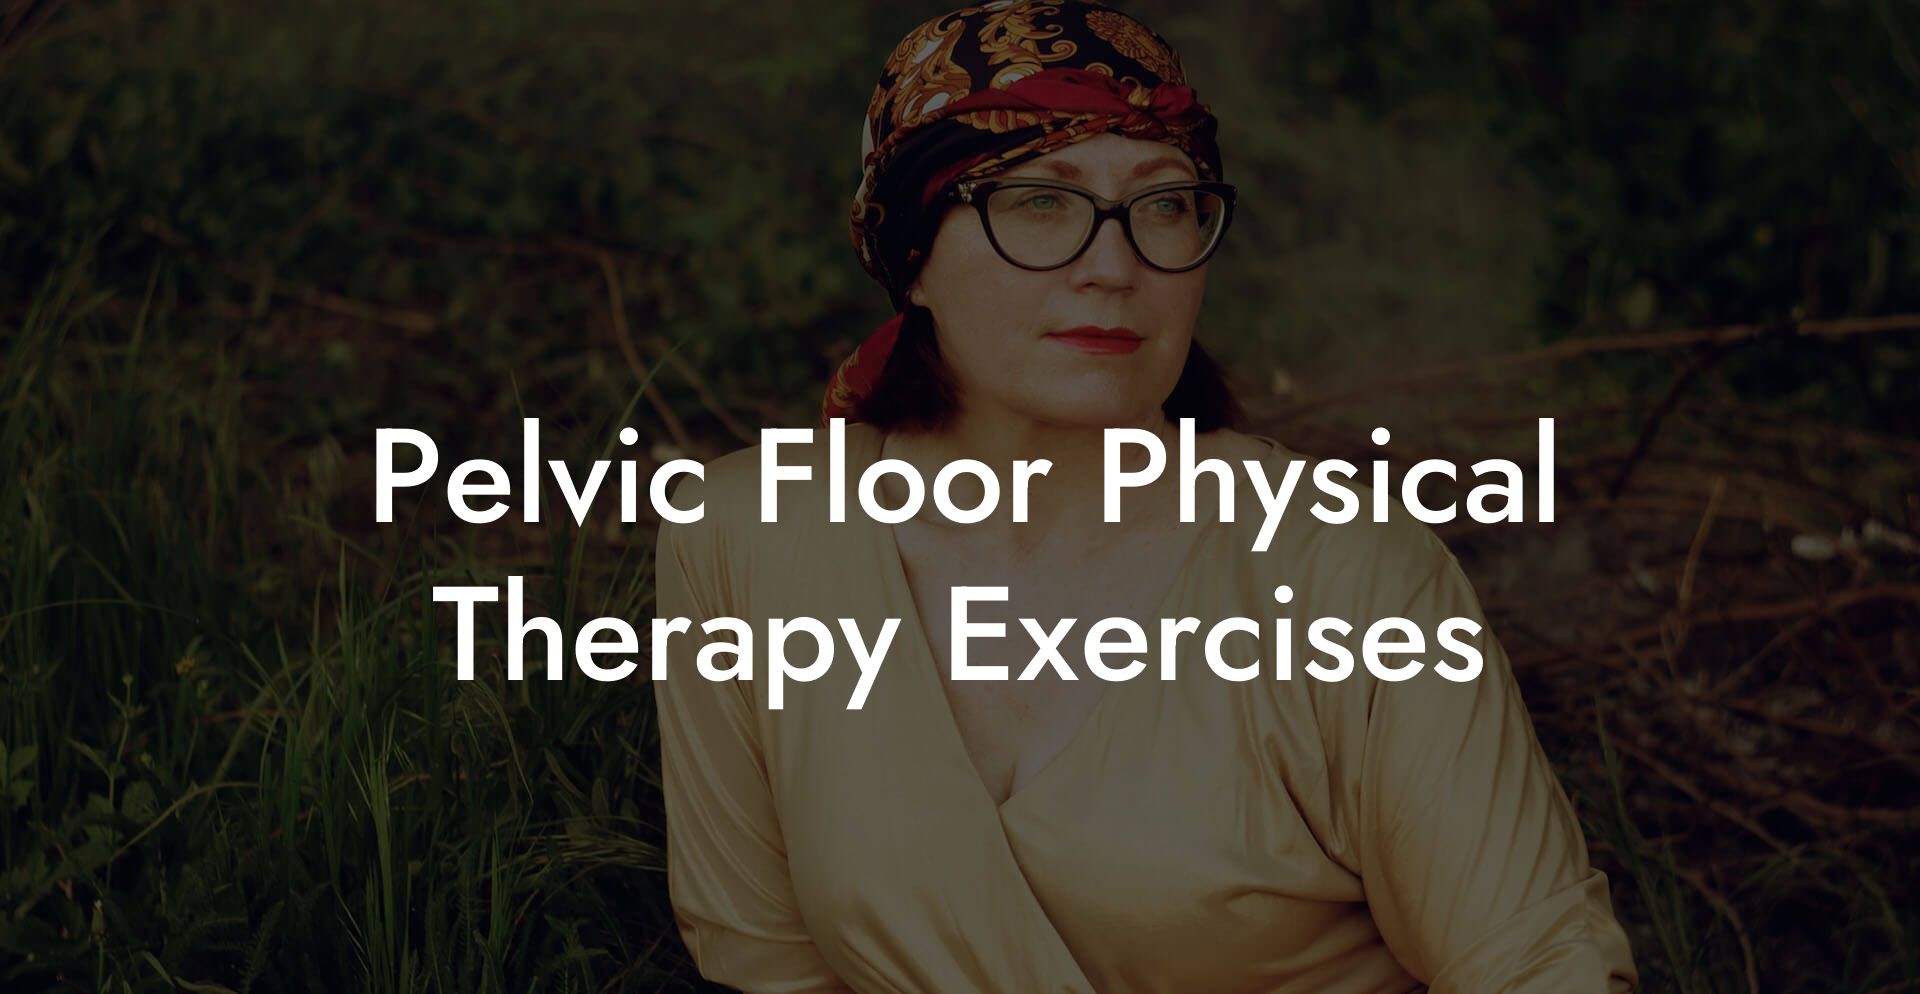 Pelvic Floor Physical Therapy Exercises